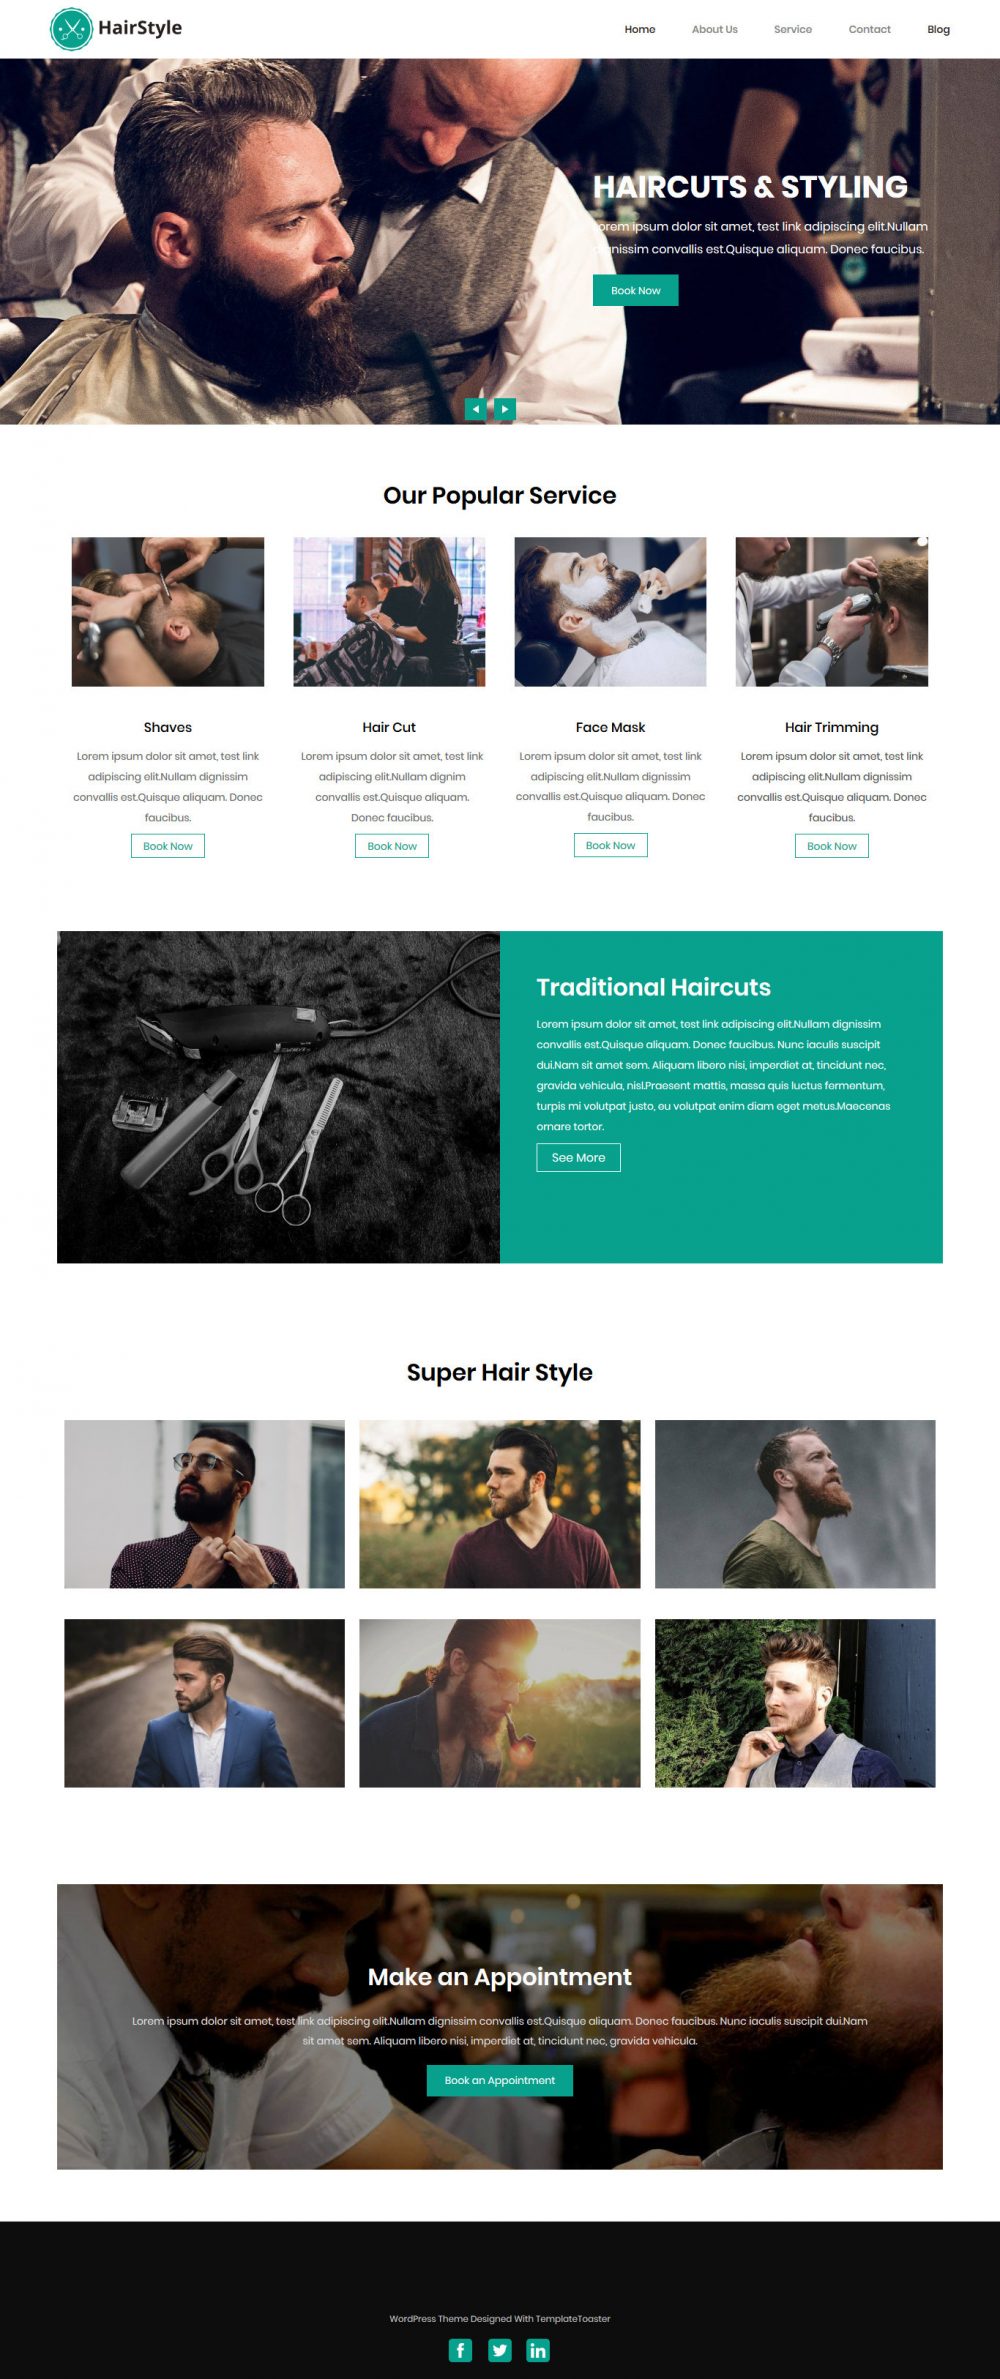 HairStyle Barber Shop HTML Template